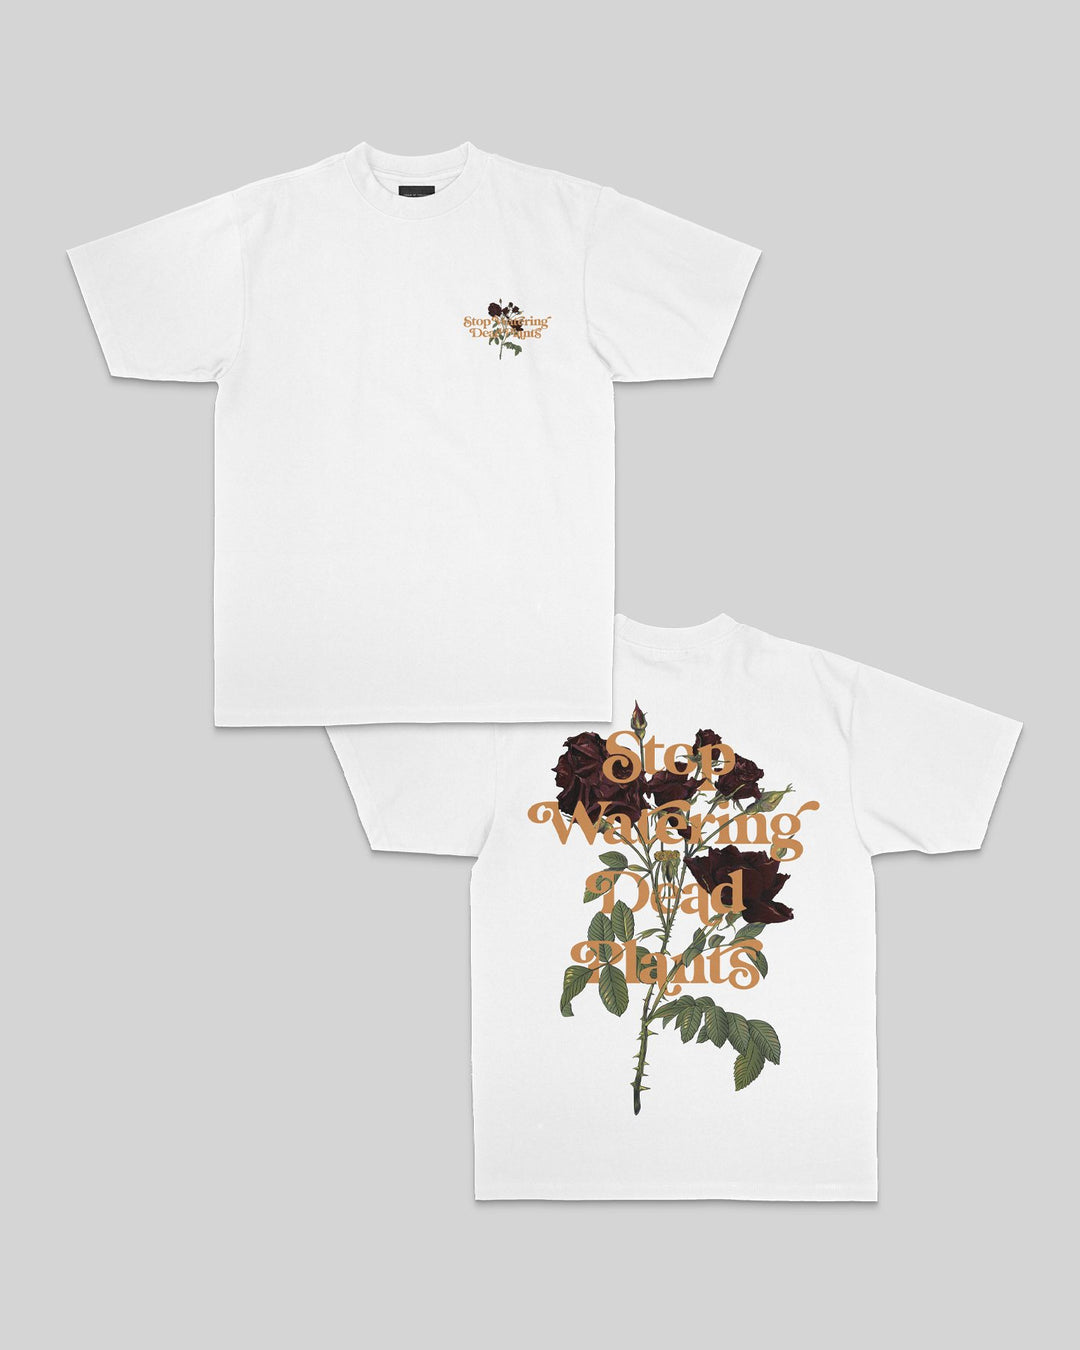 Stop Watering Dead Plants V4 White Tee - trainofthoughtcollective